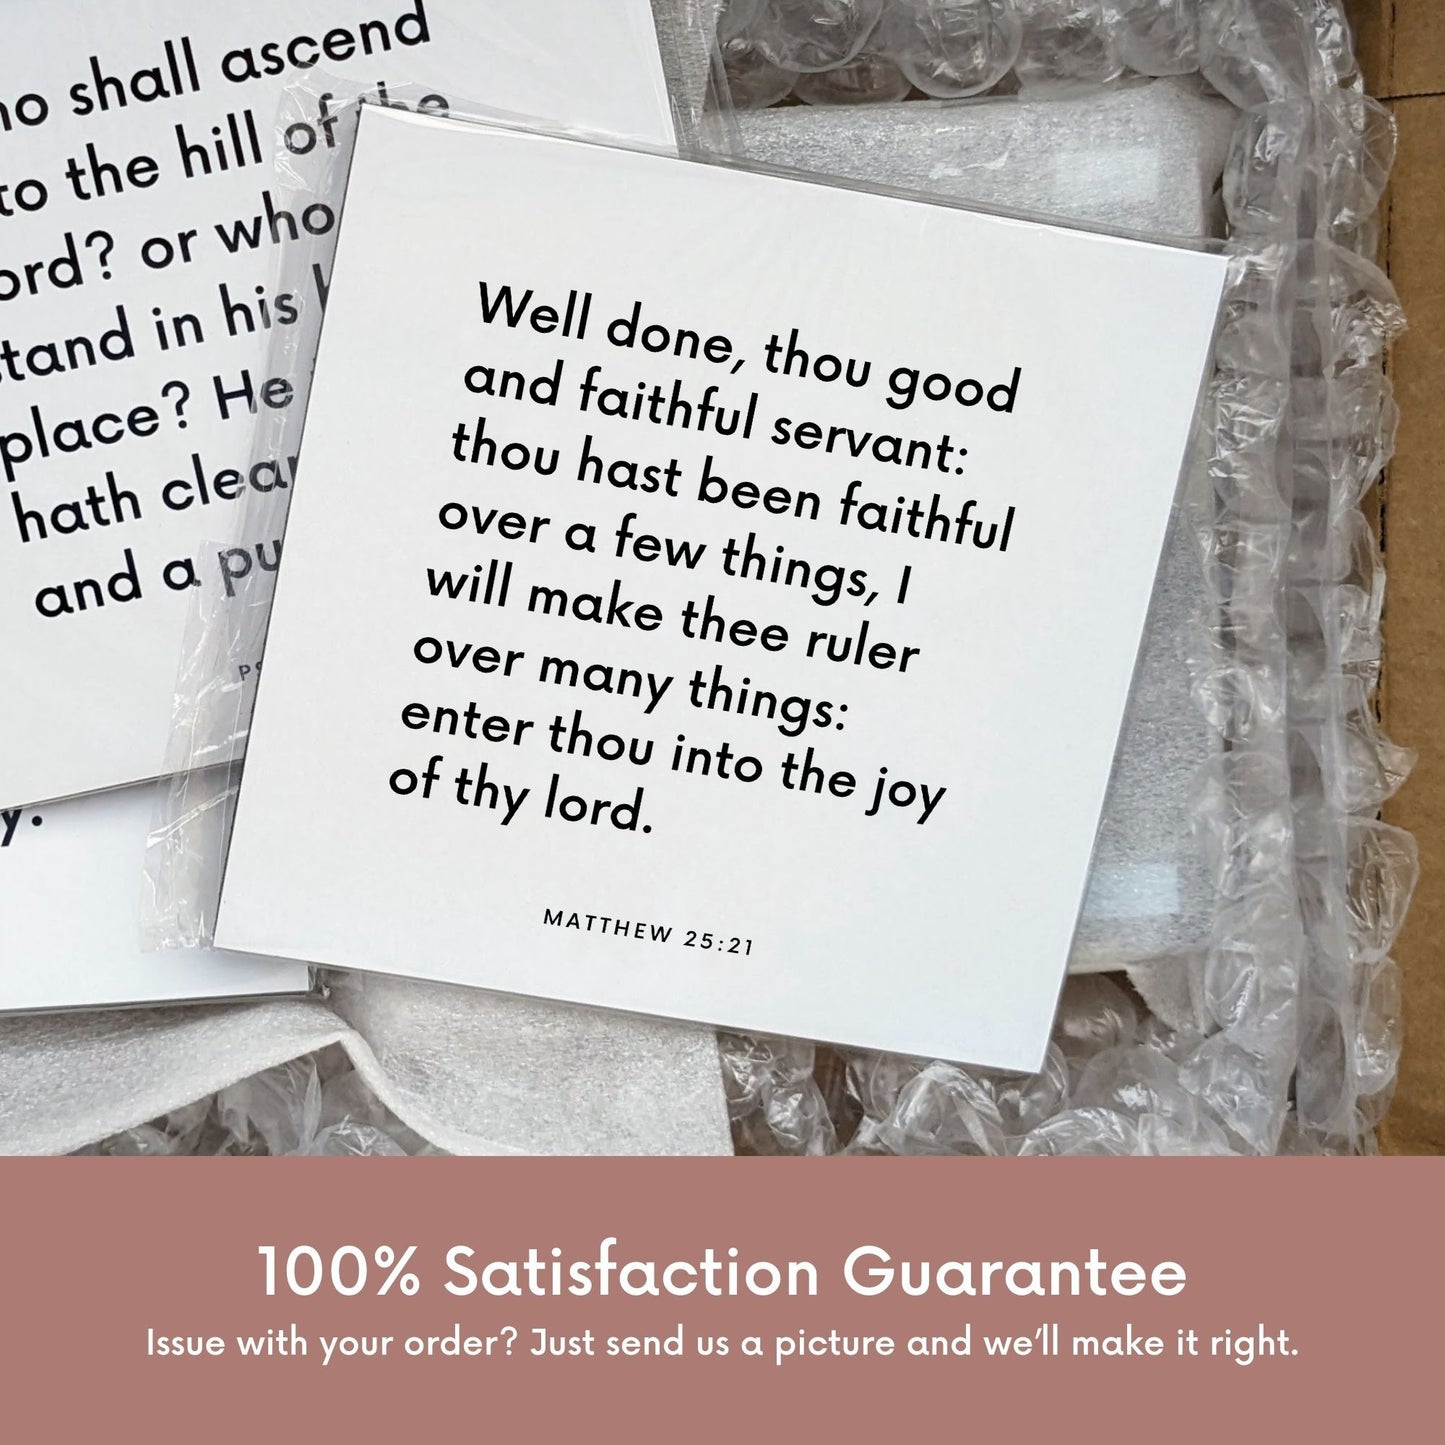 Shipping materials for scripture tile of Matthew 25:21 - "Well done, thou good and faithful servant"